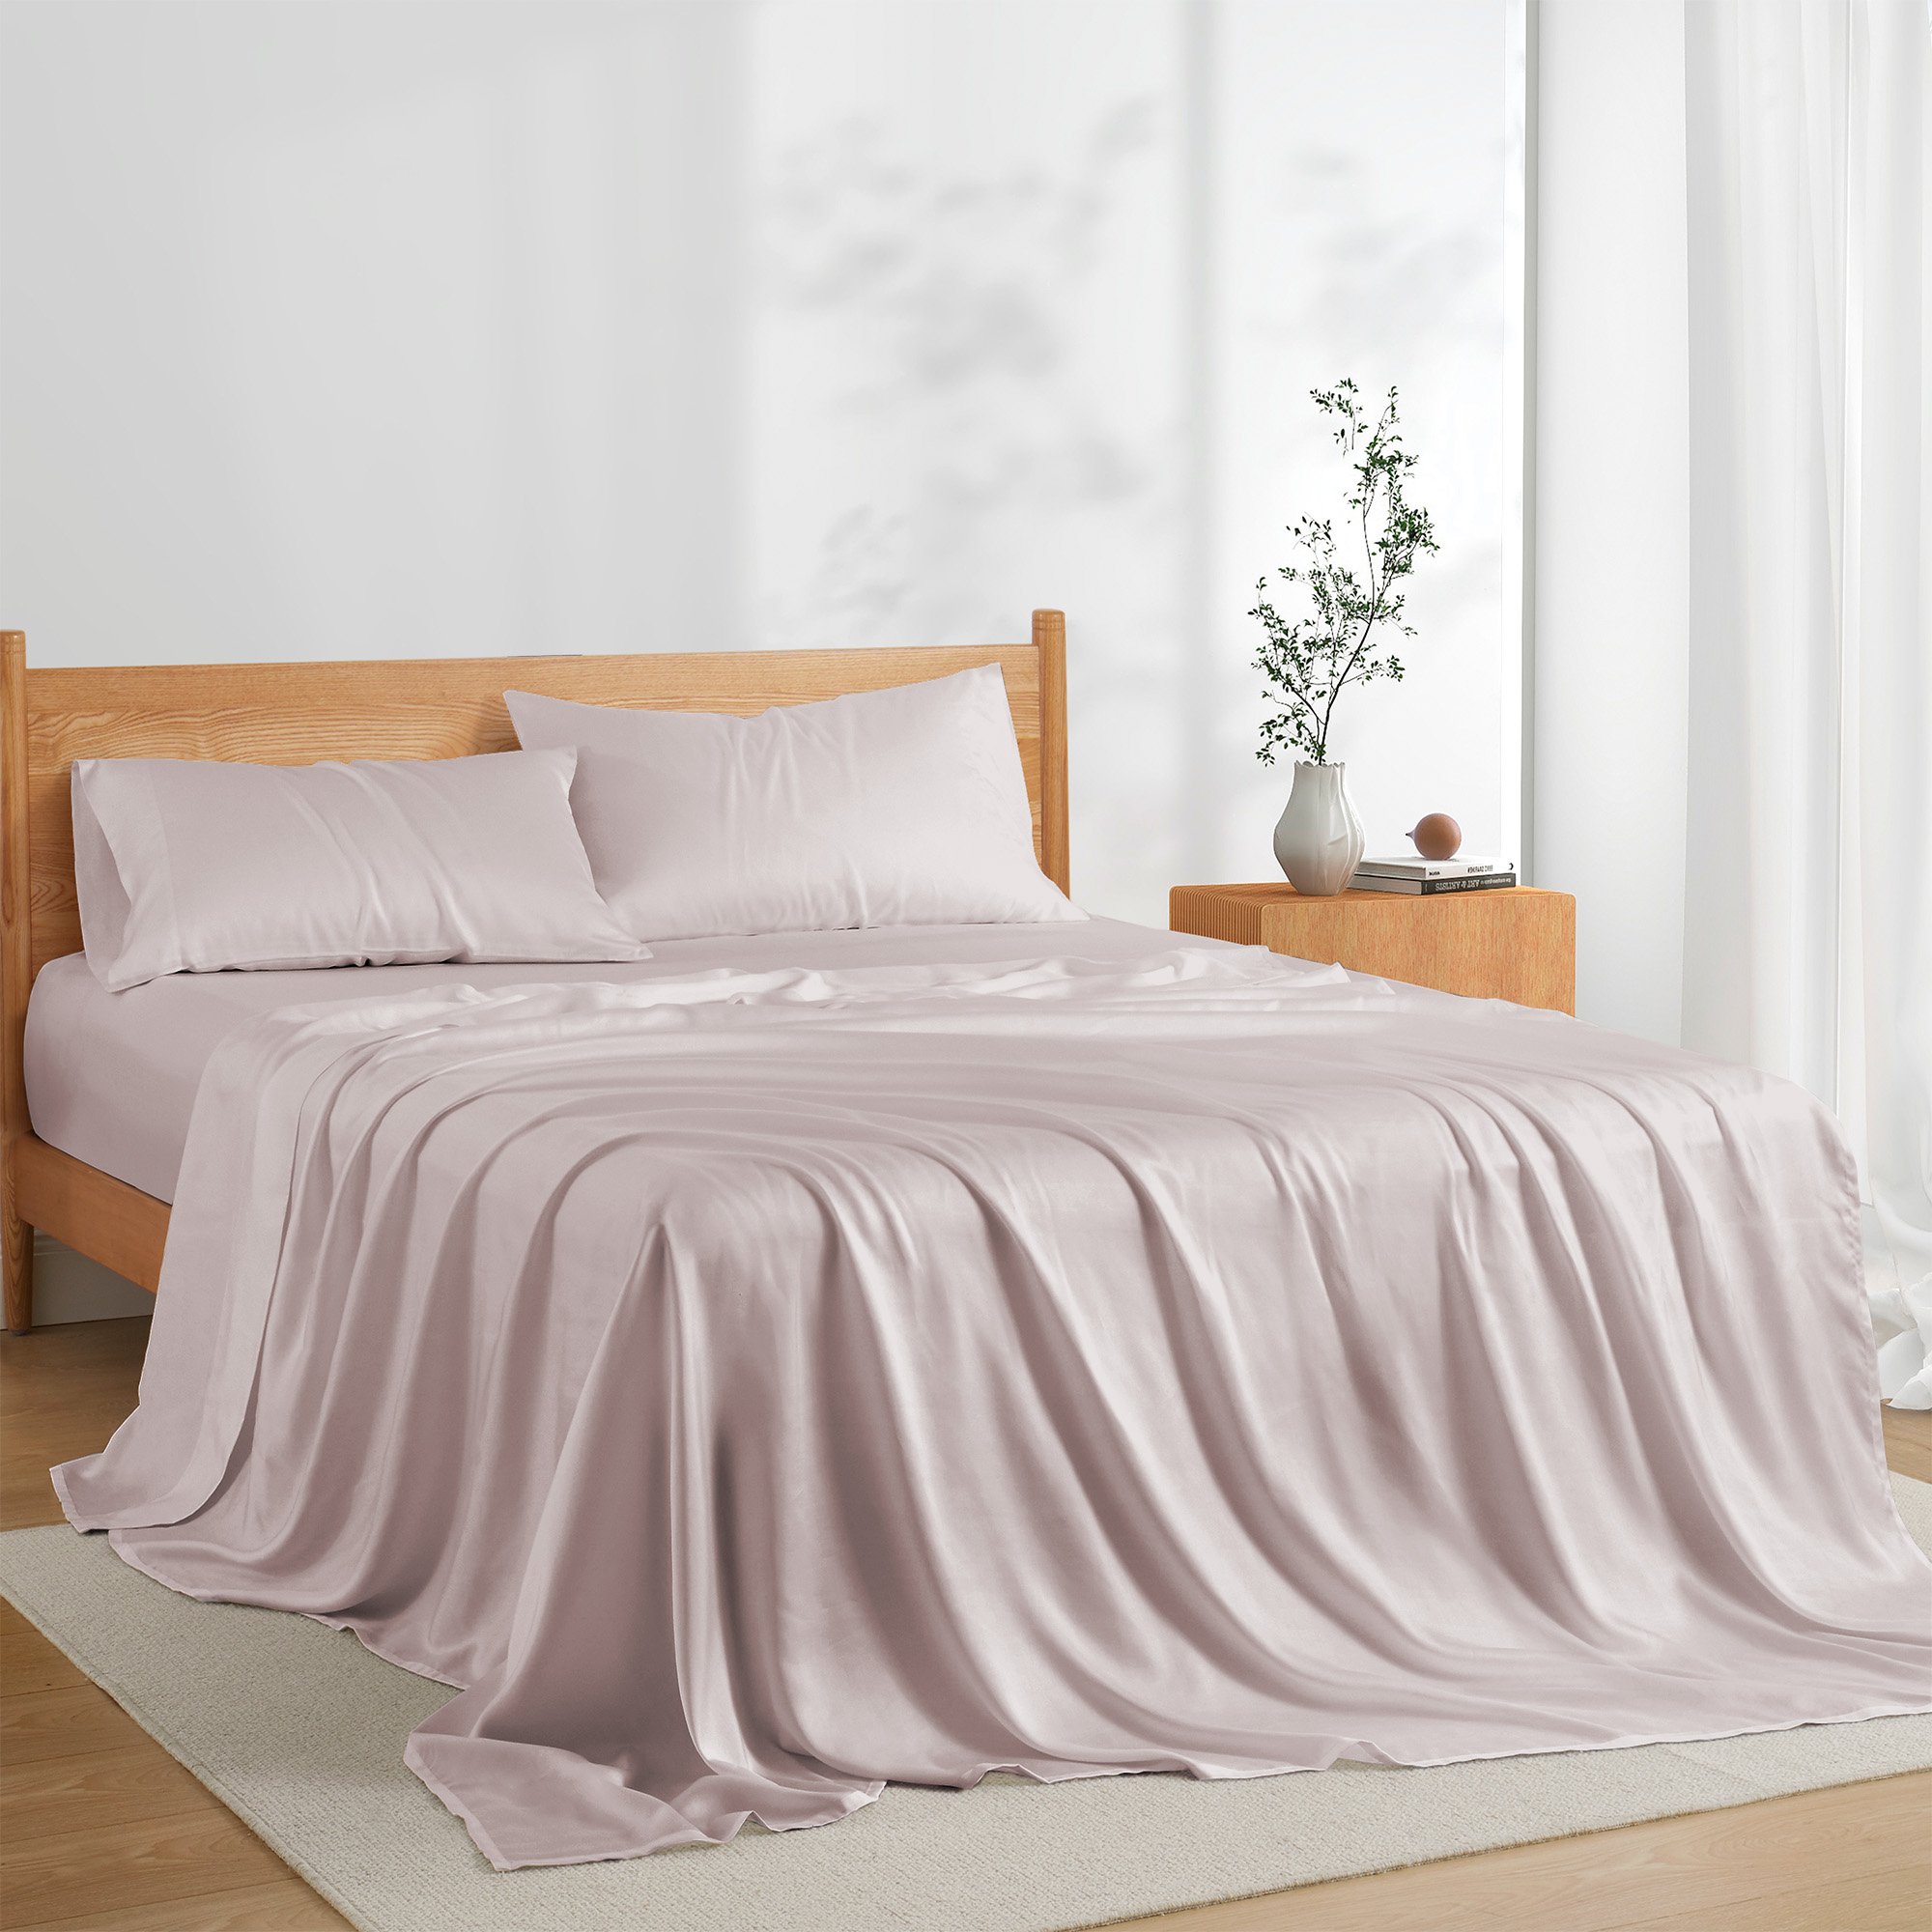 Tencel Lyocell Bed Sheets Silky Soft & Smooth Breathable Sheets, Luxury Hotel Bedding - Full Size